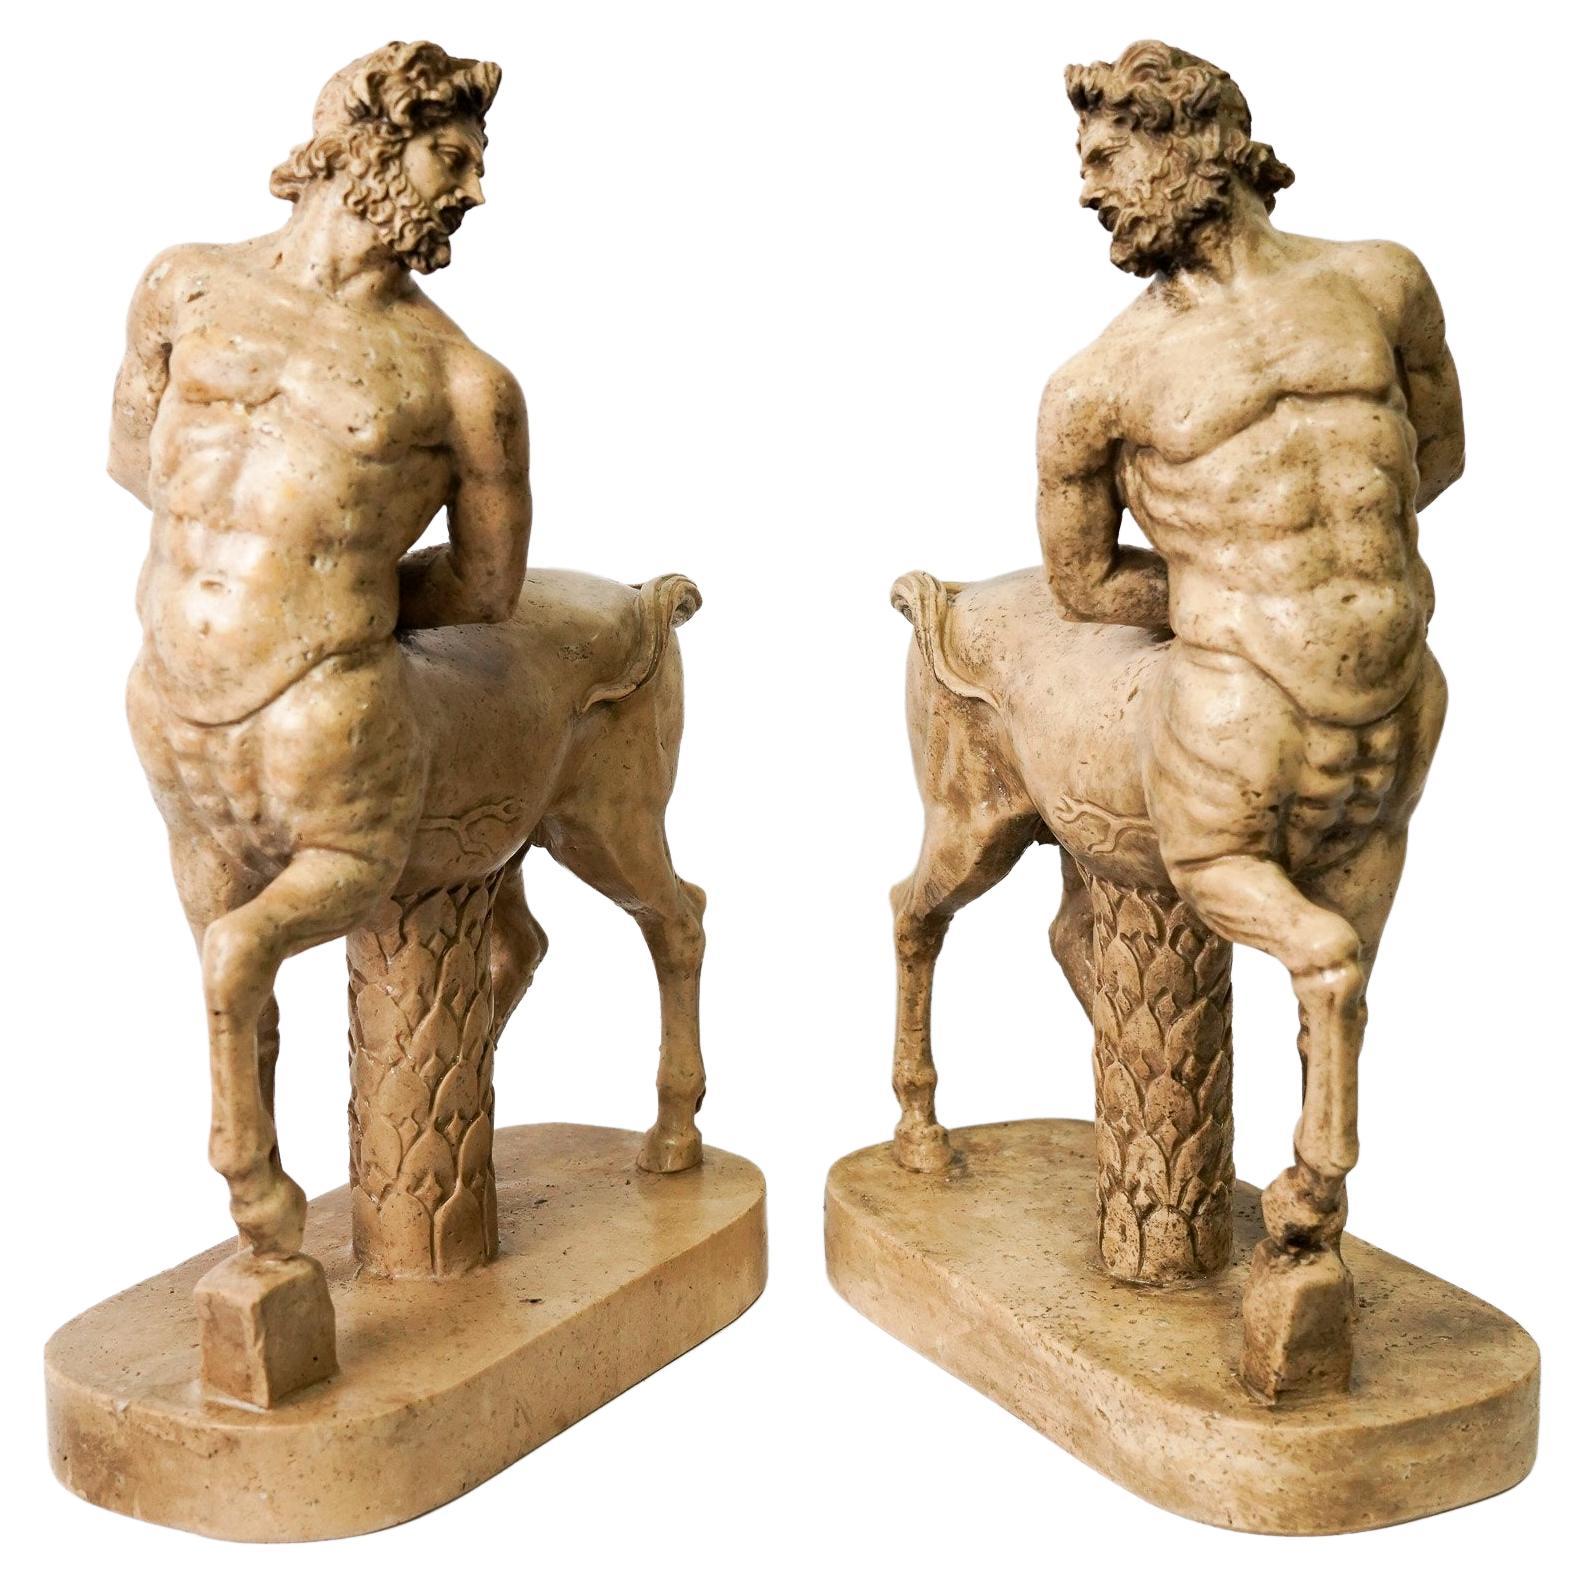 Furietti centaurs in Siena yellow marble, marble sculpture, ancient sculpture For Sale